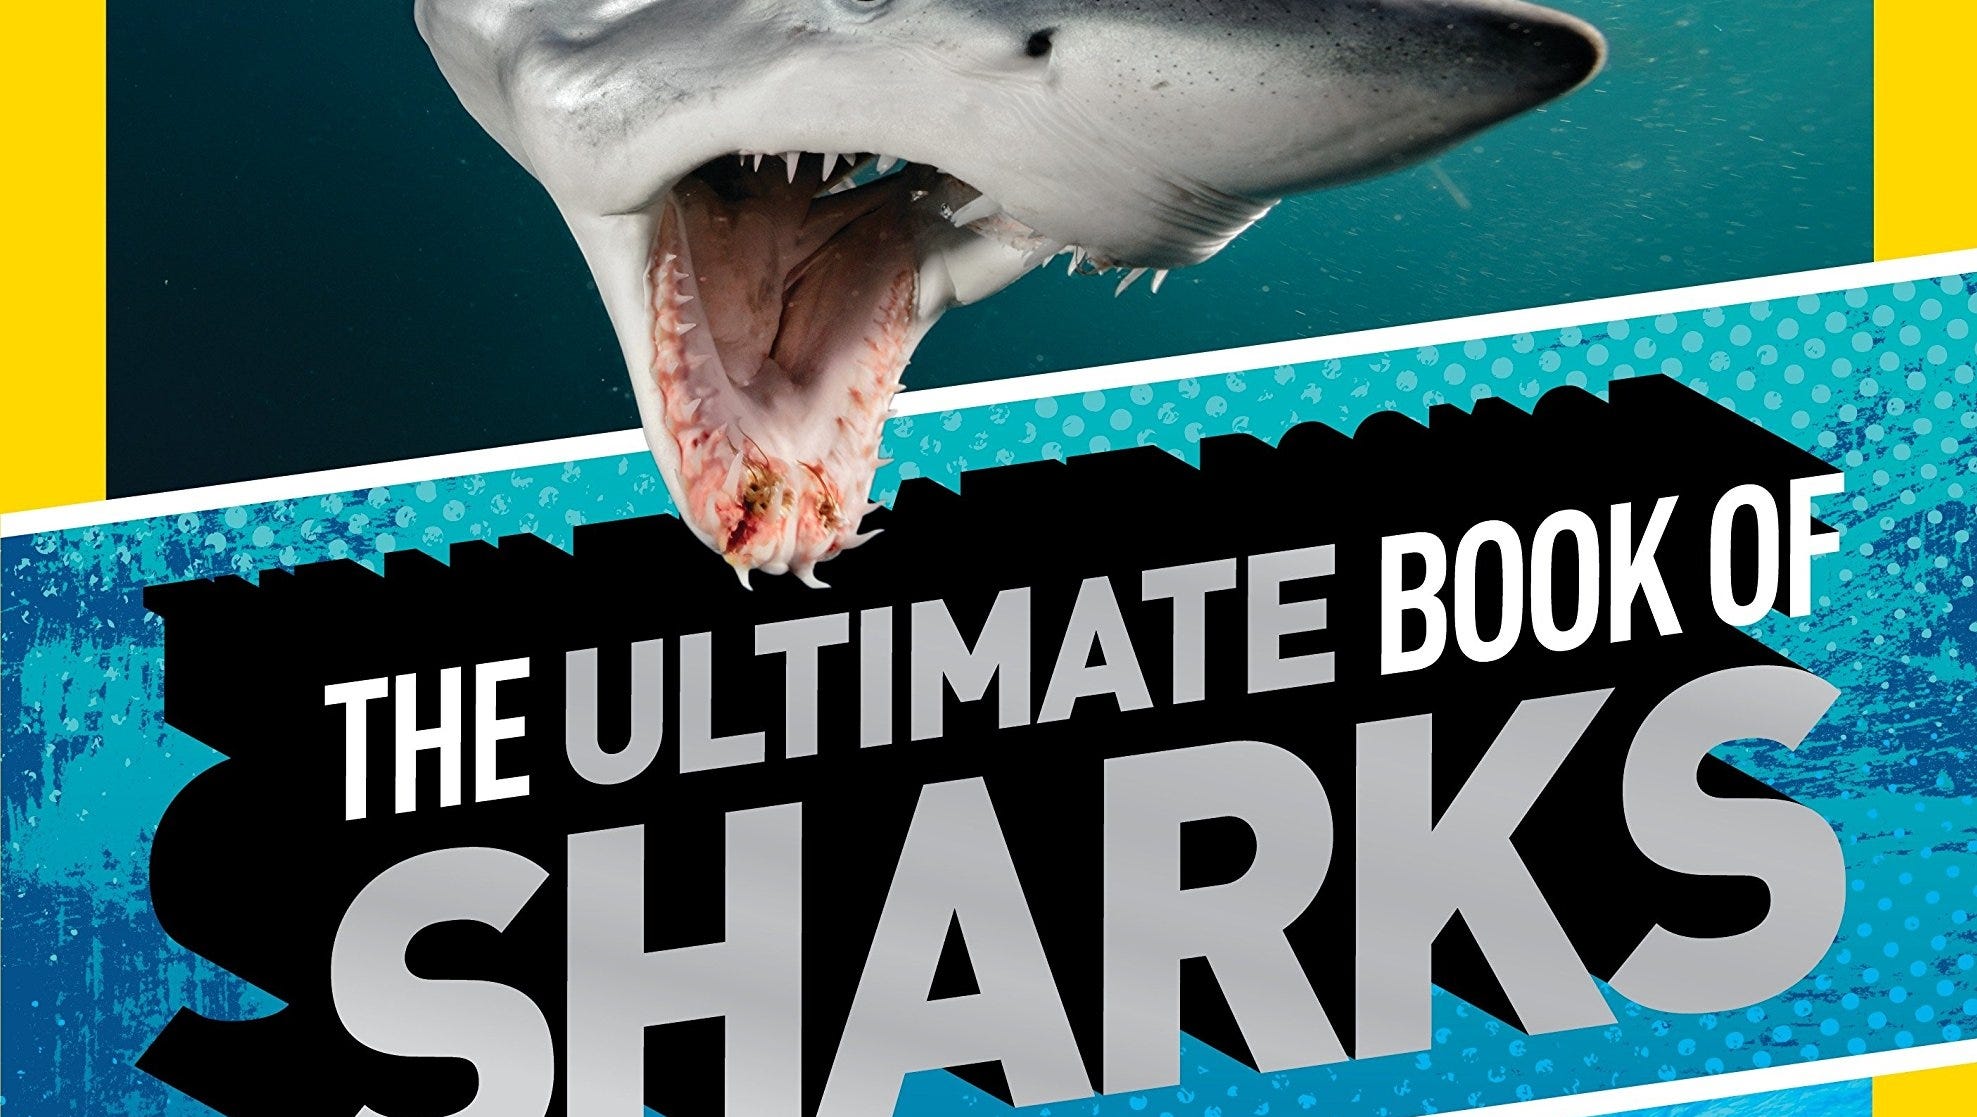 Shark book really is 'ultimate'